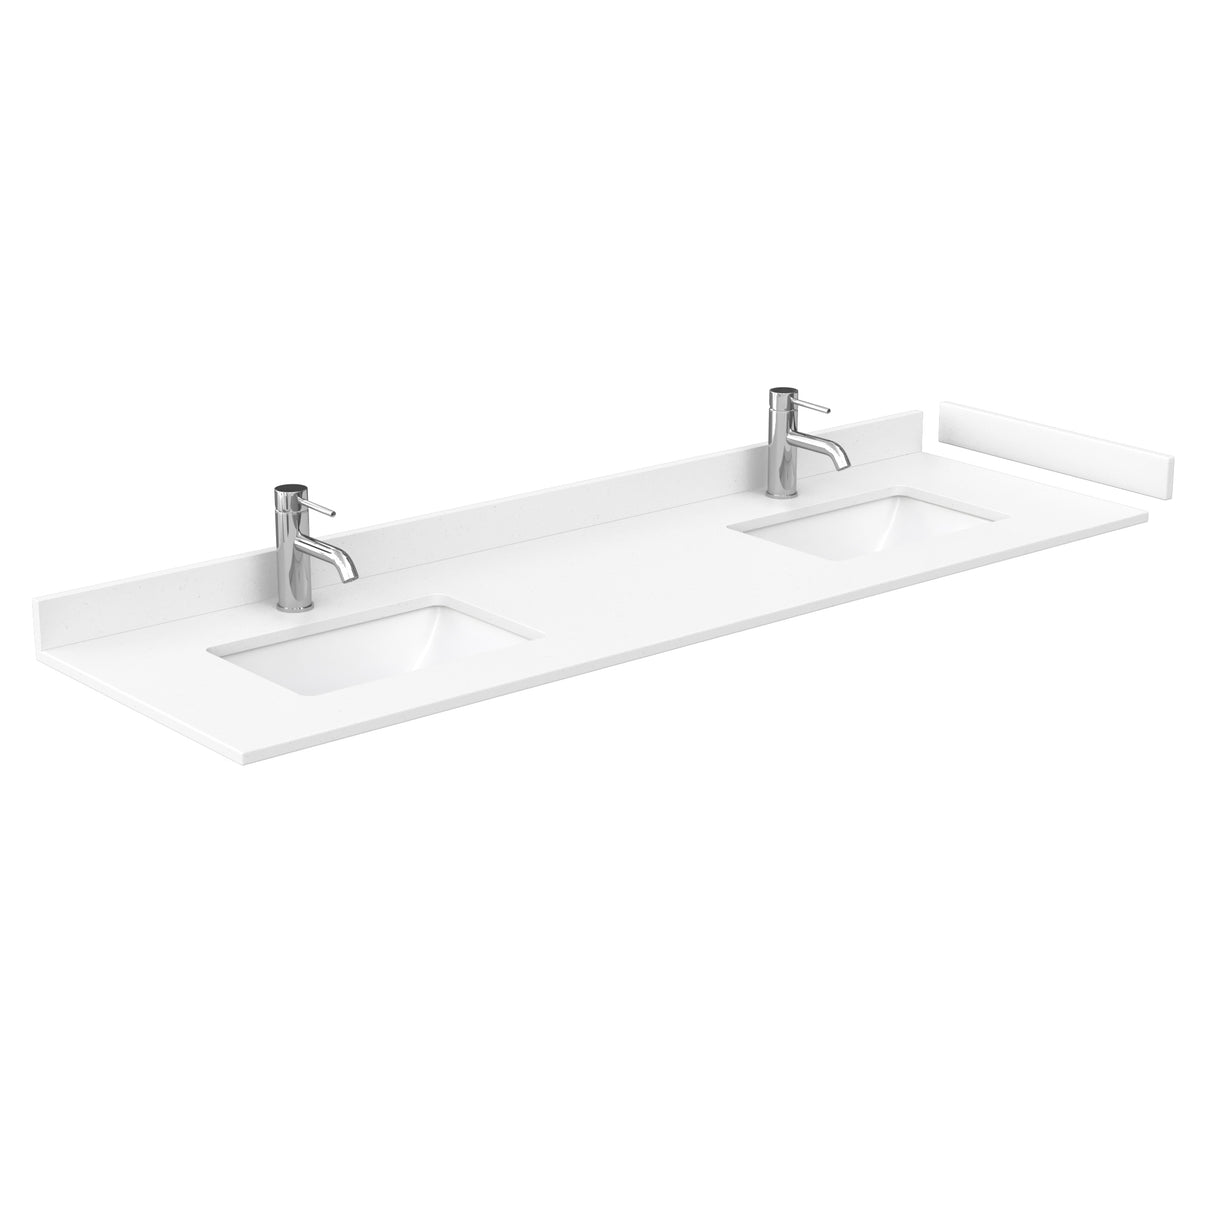 Strada 72 Inch Double Bathroom Vanity in White White Cultured Marble Countertop Undermount Square Sink Brushed Nickel Trim